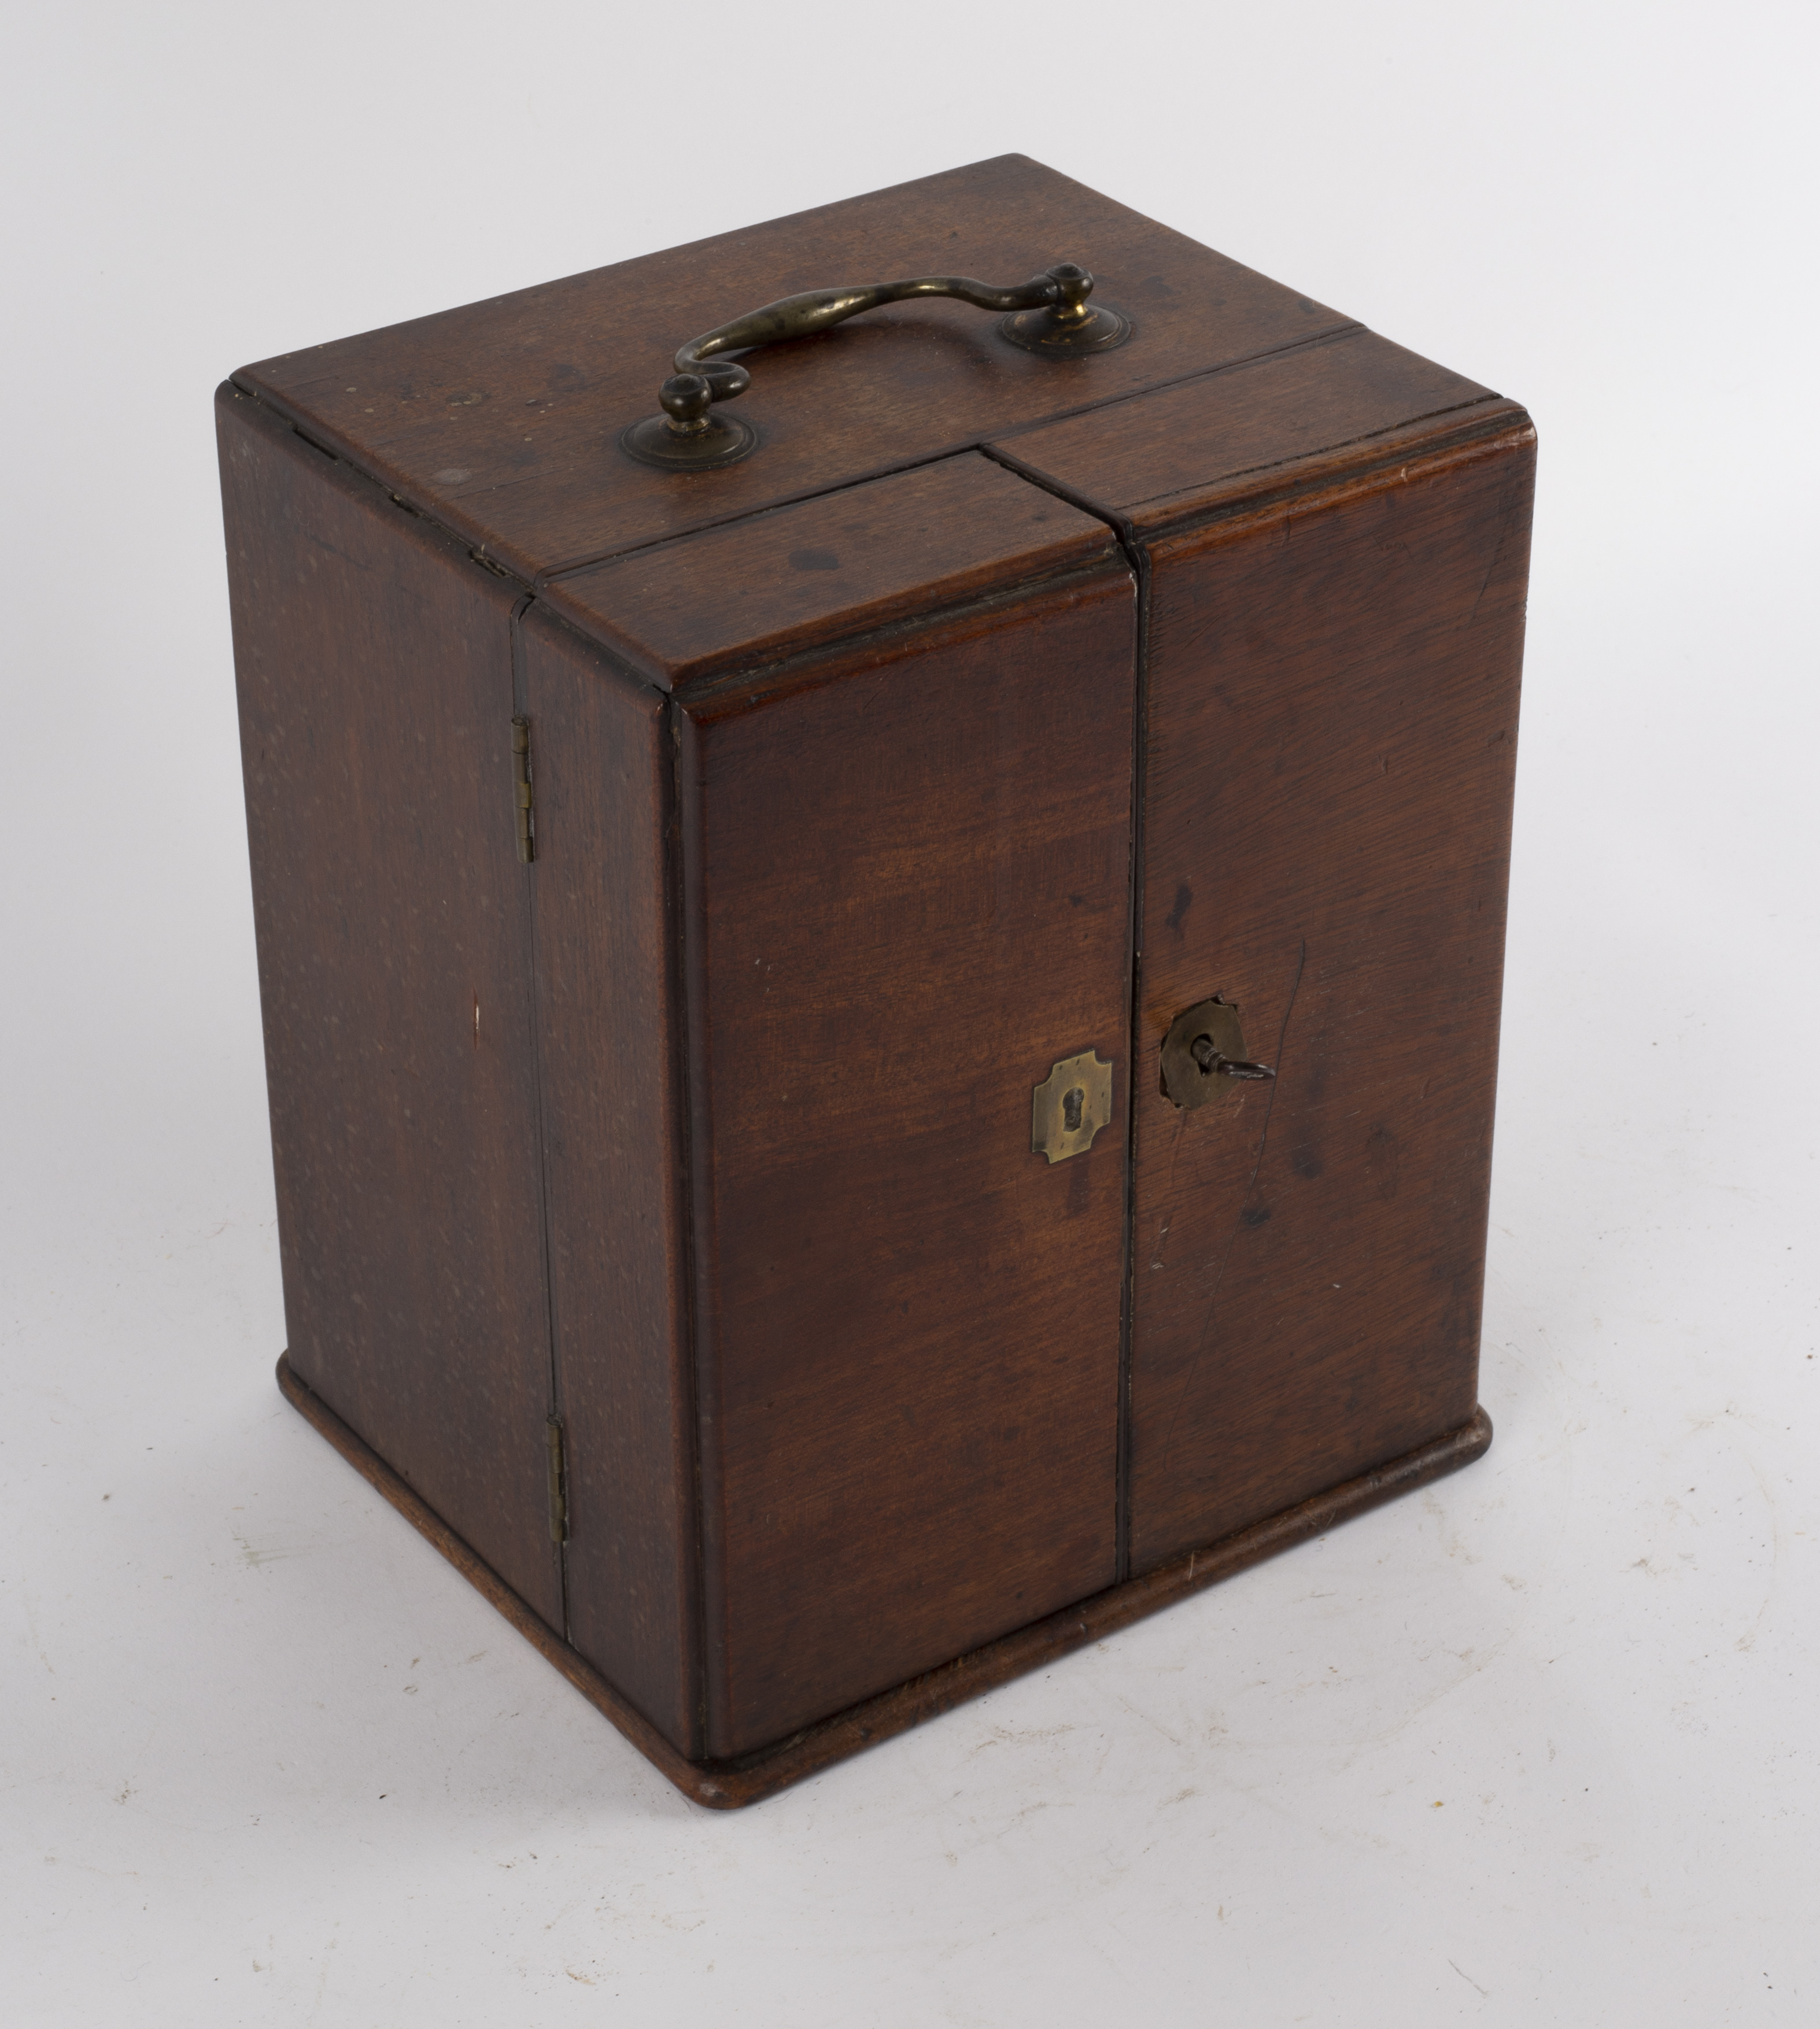 A 19th Century apothecary box, the hinged doors concealing compartments containing medicine bottles, - Image 3 of 3